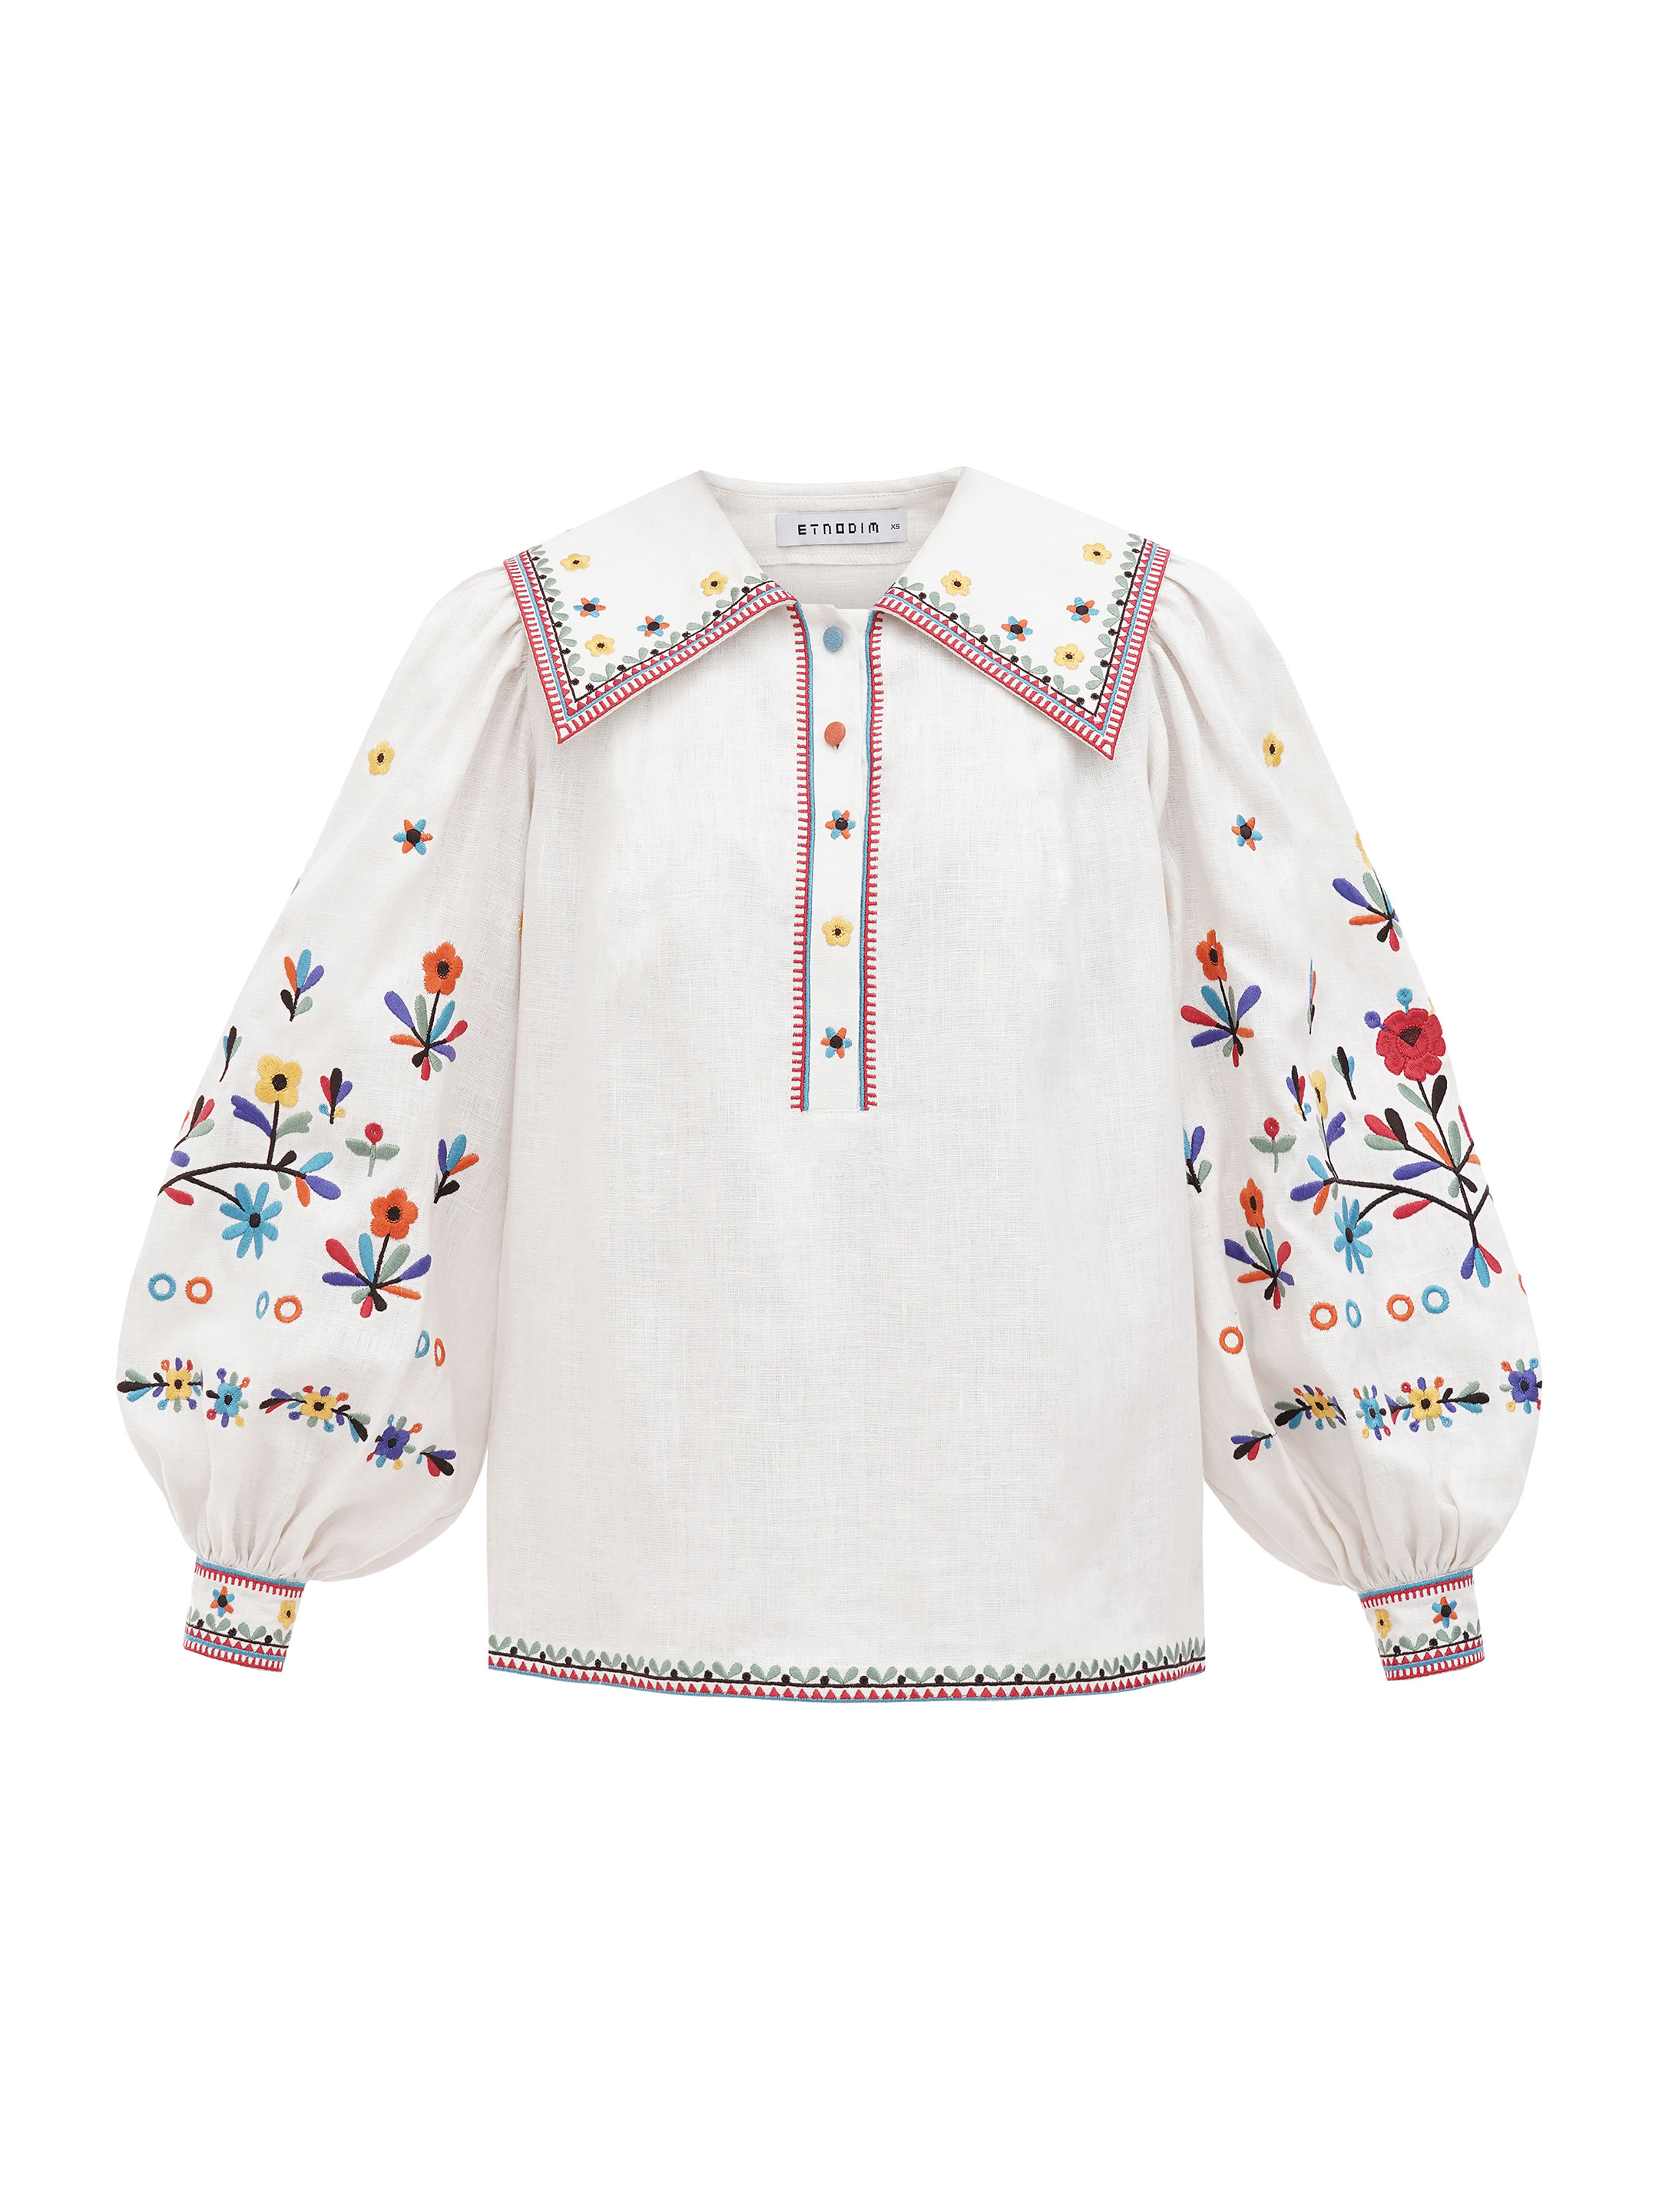 Embroidered shirt in boho style with white linen Bee buy in Kyiv